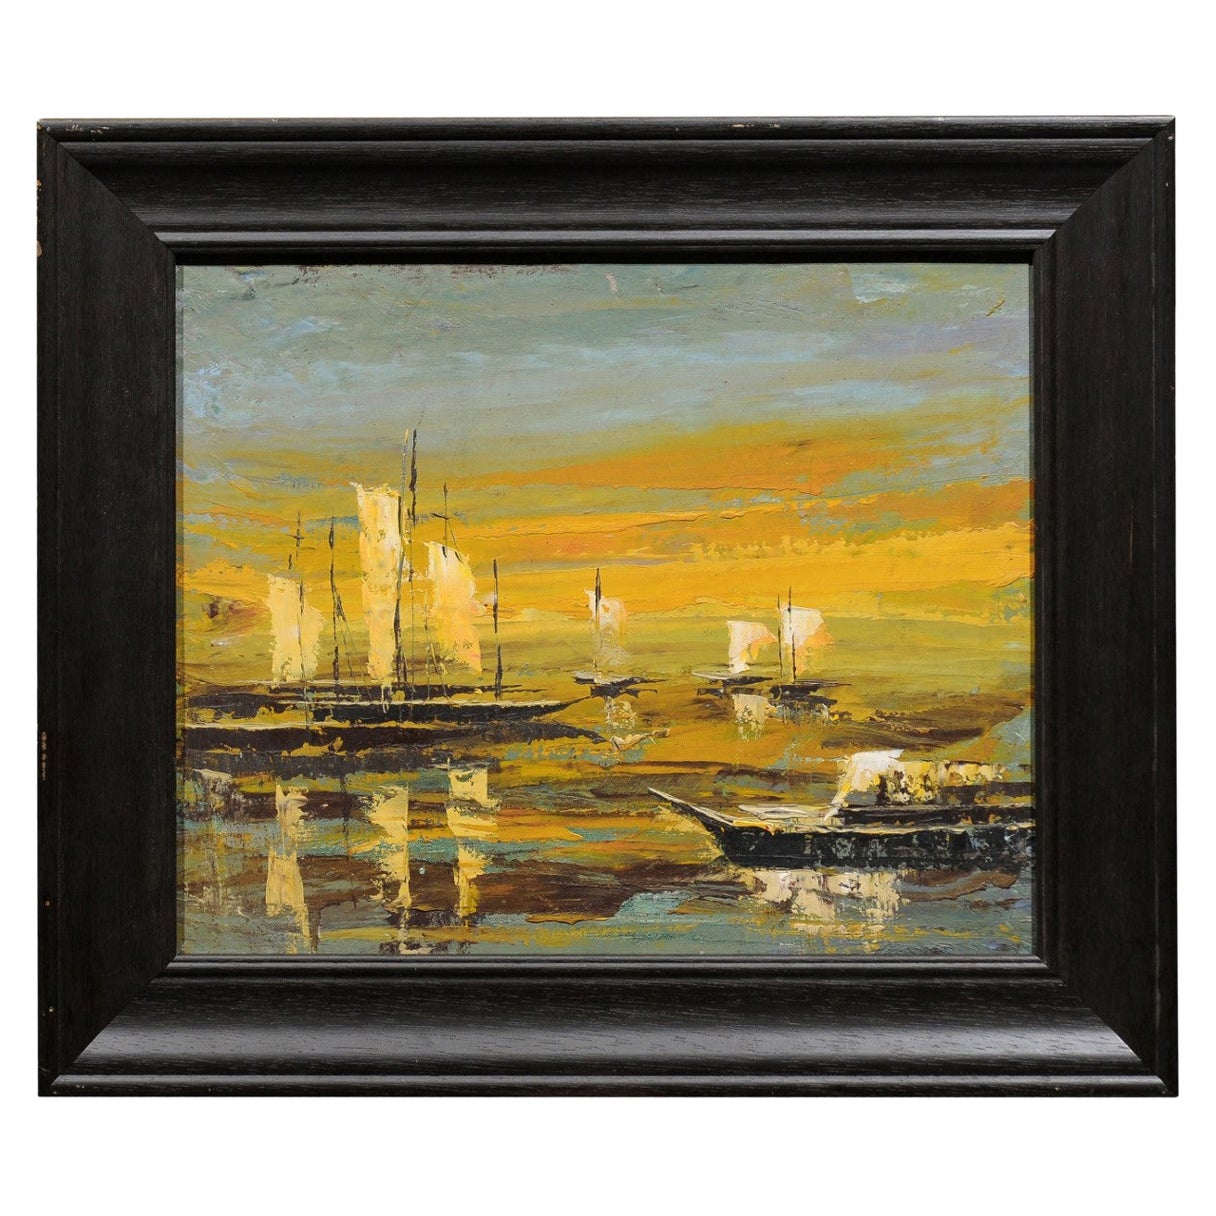 Framed 20th Century Oil on Canvas Seascape Painting with Sailboats